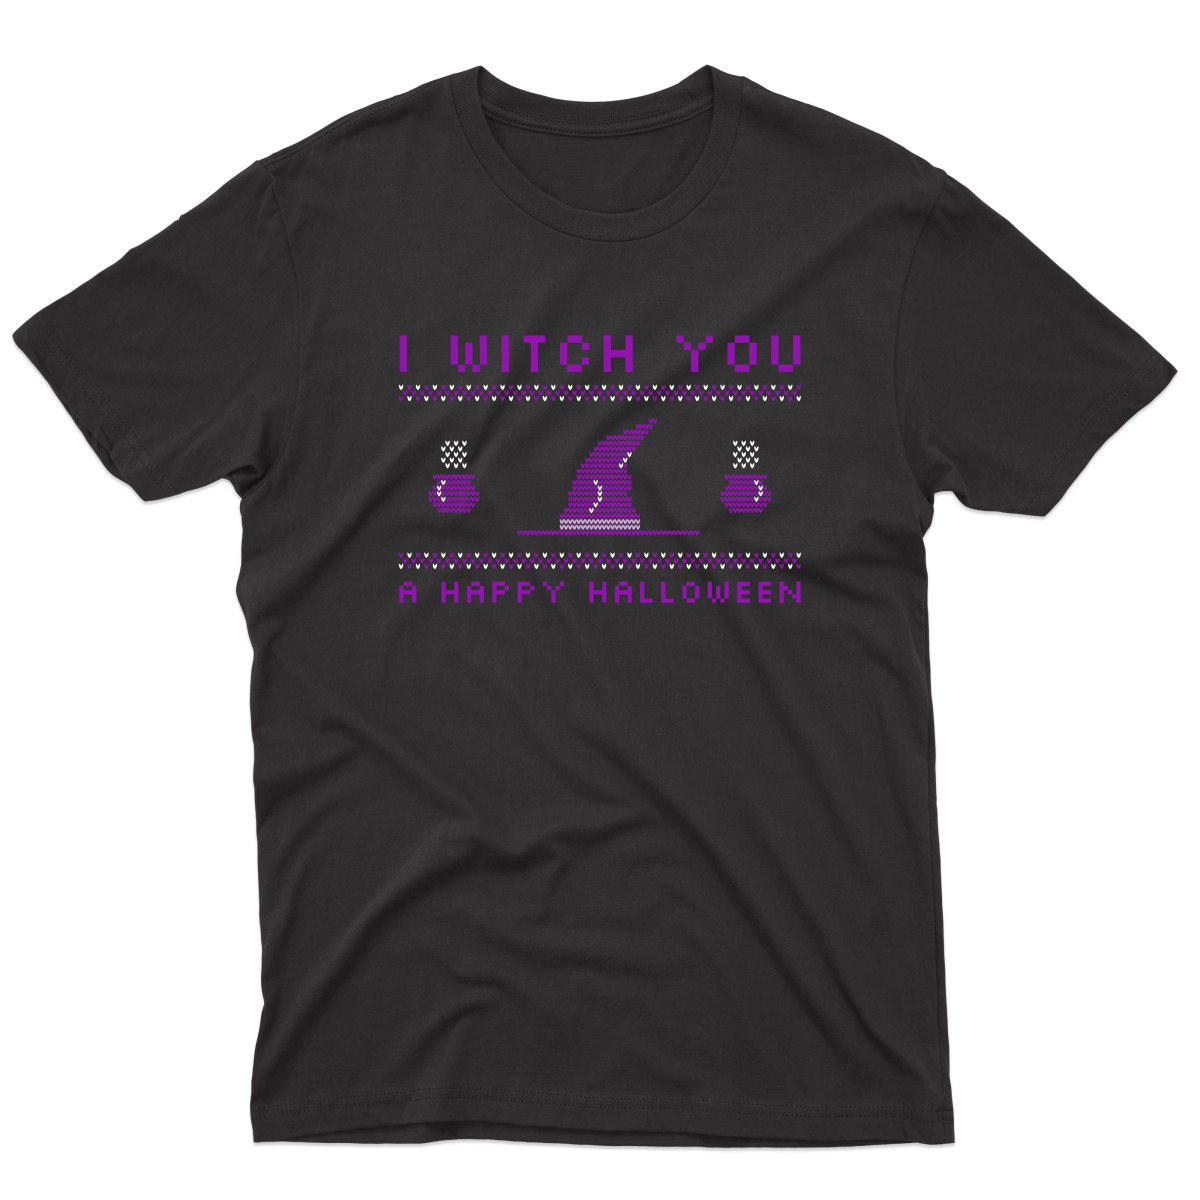 I Witch You a Happy Halloween Men's T-shirt | Black